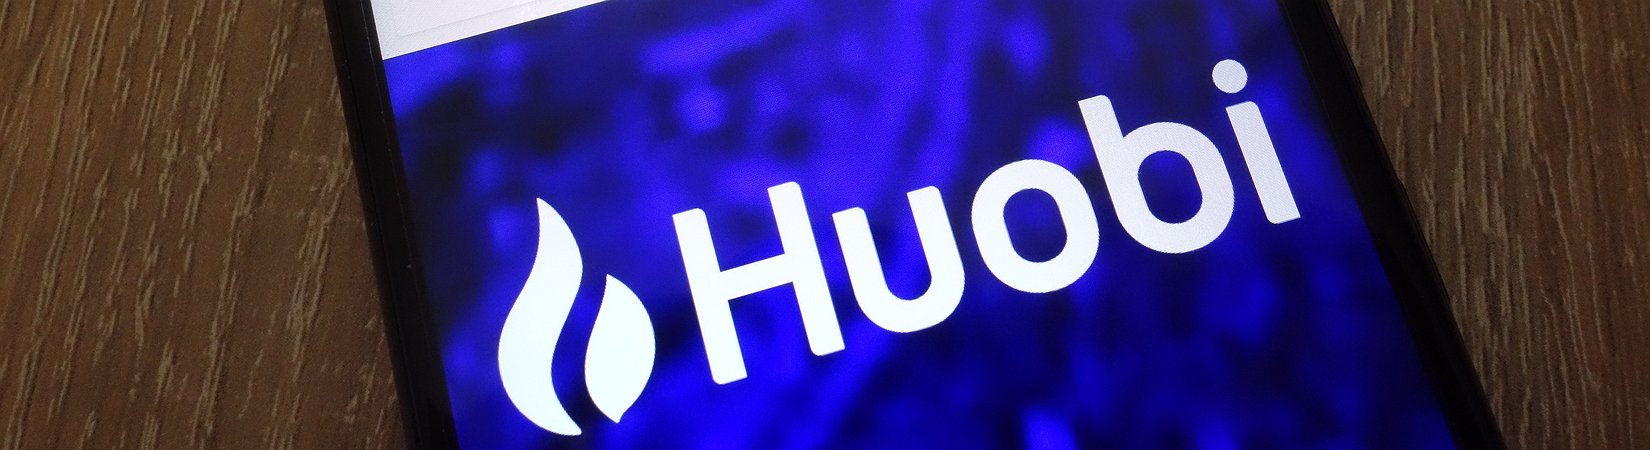 Huobi Wallet Adds Support for Lending and Borrowing Services ...